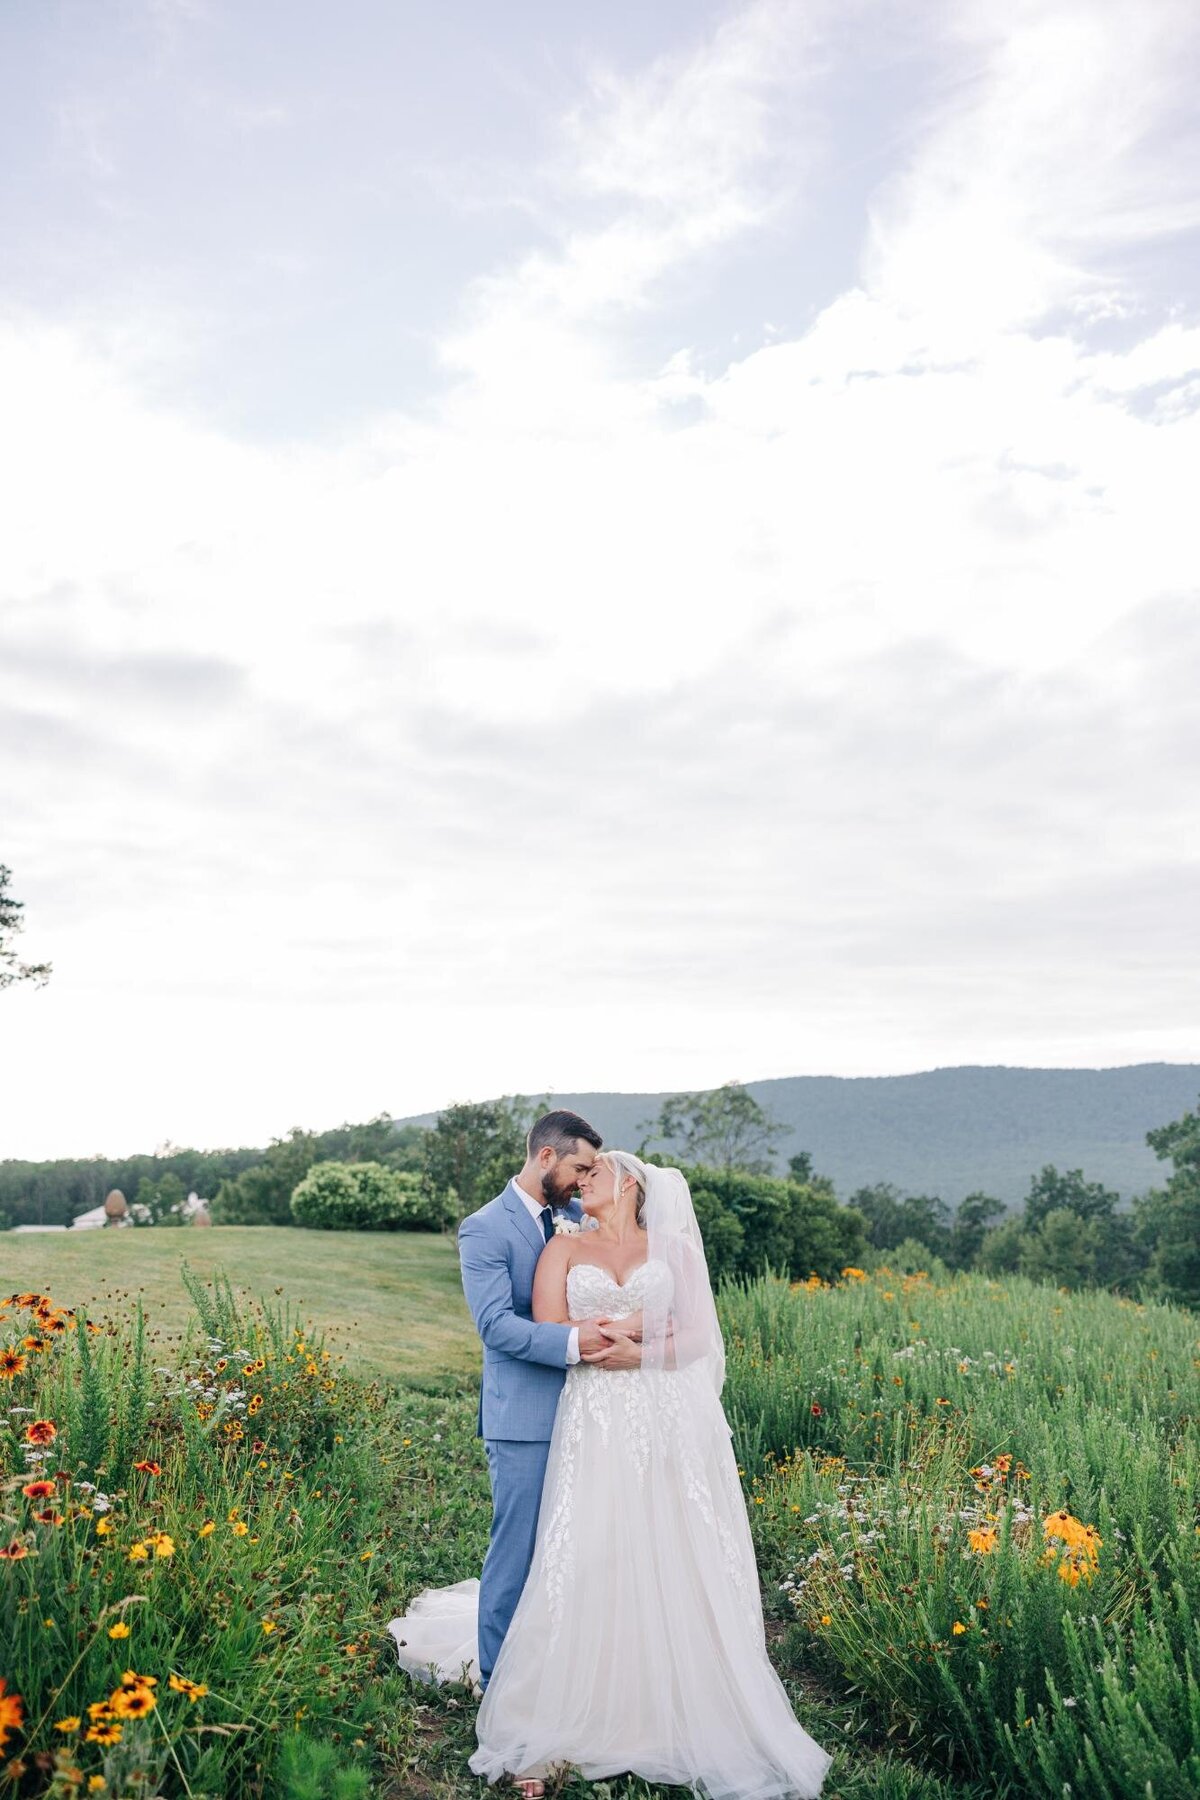 A couple in wedding attire embracing in a field with wildflowers, under a cloudy sky.